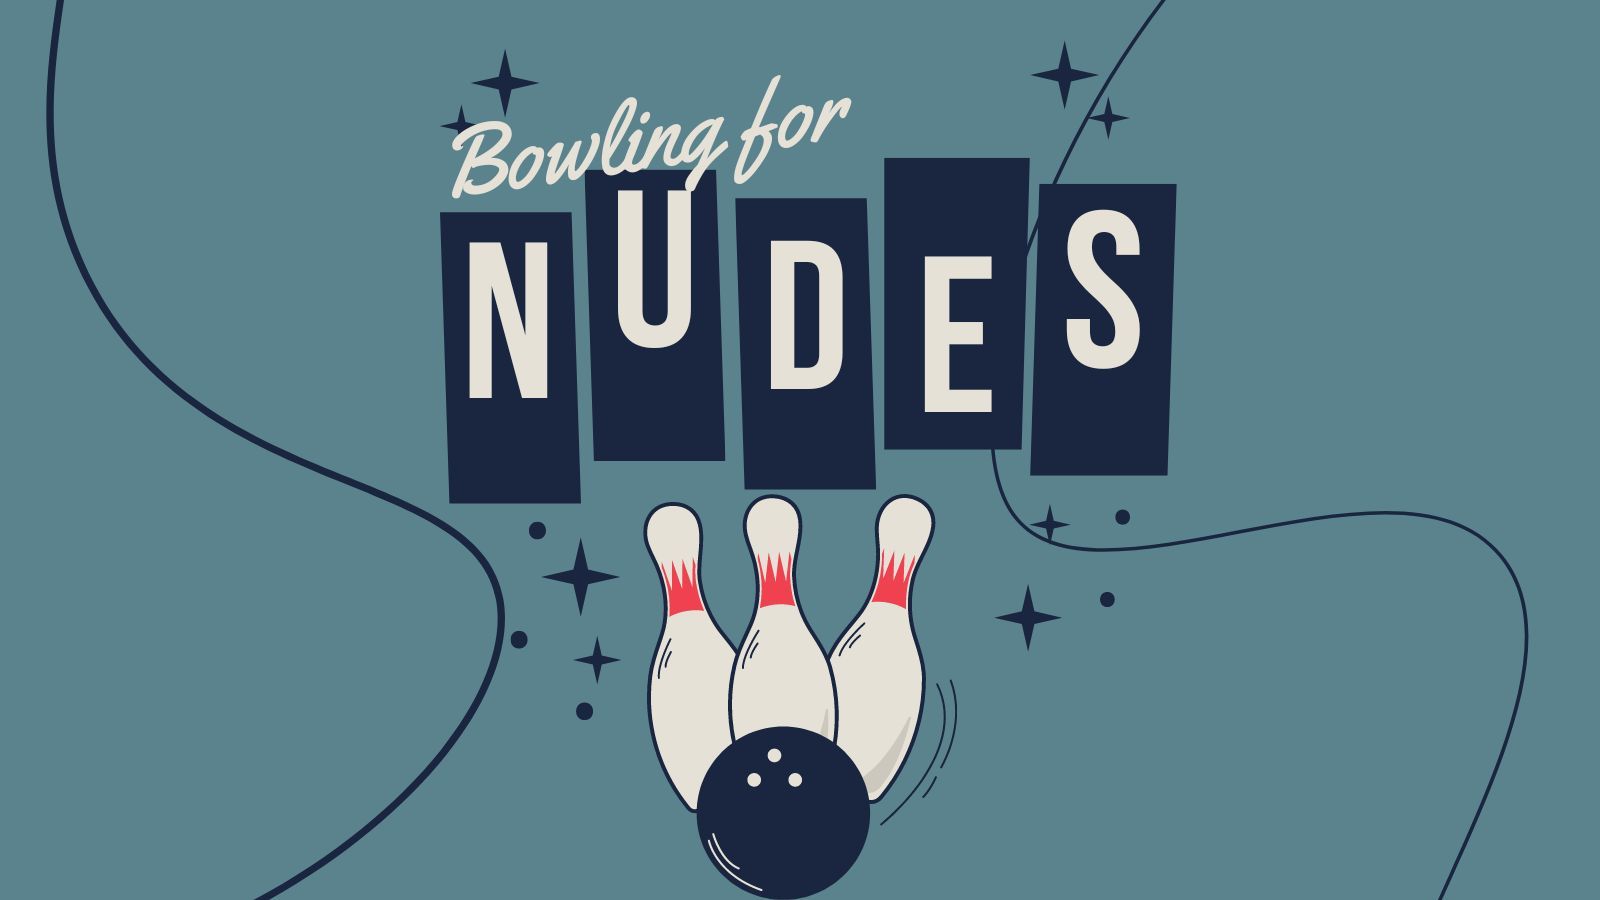 andrea gaviria recommends Bowling In The Nude